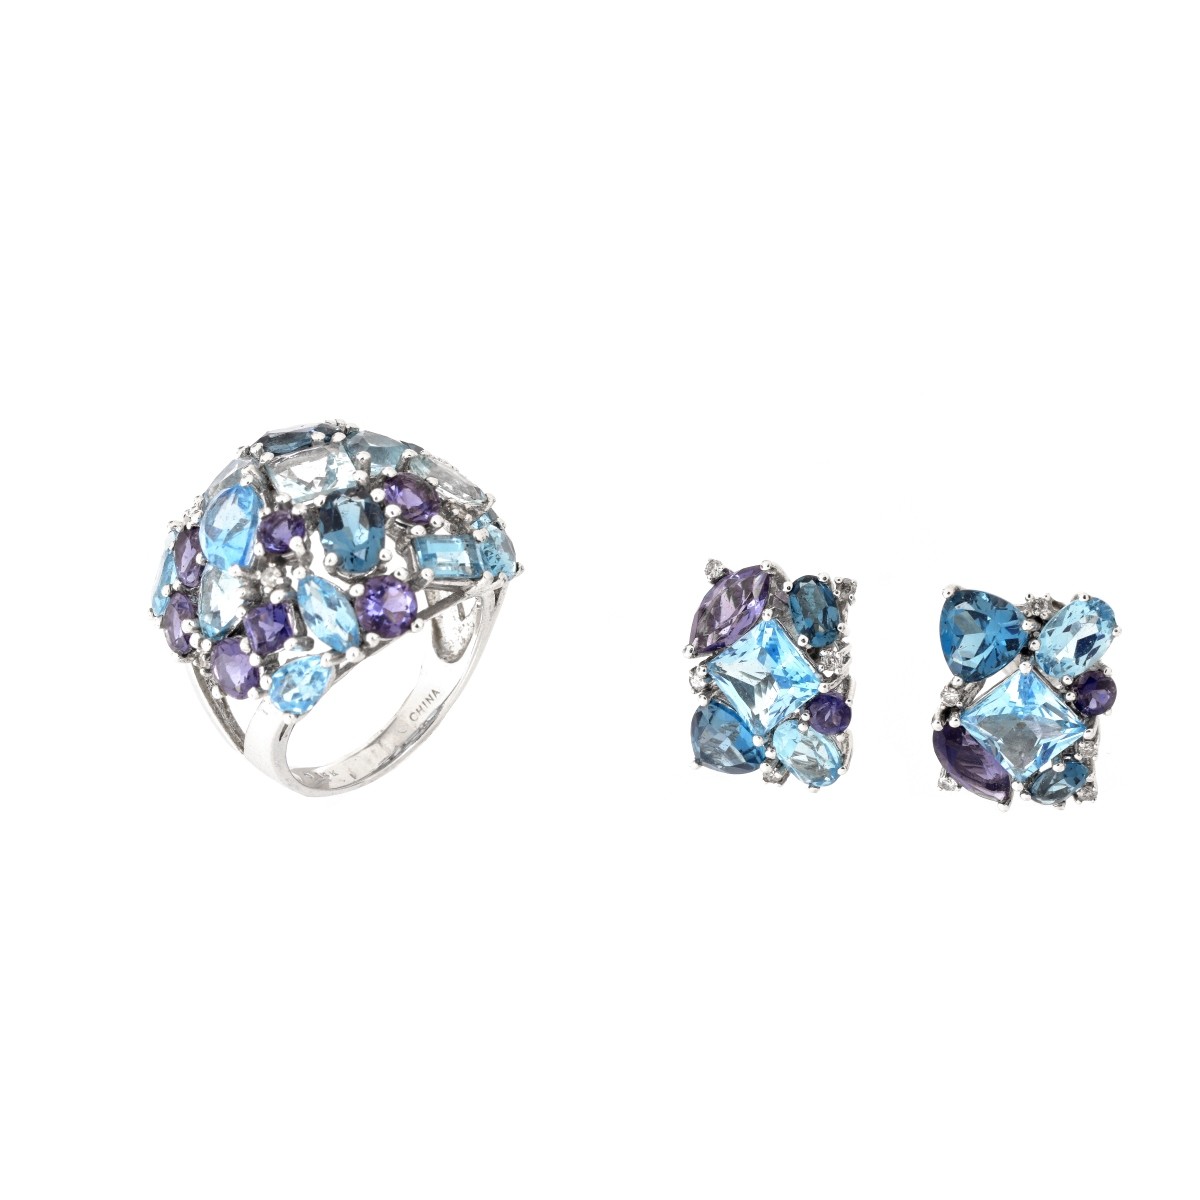 London Topaz Ring and Earring Suite